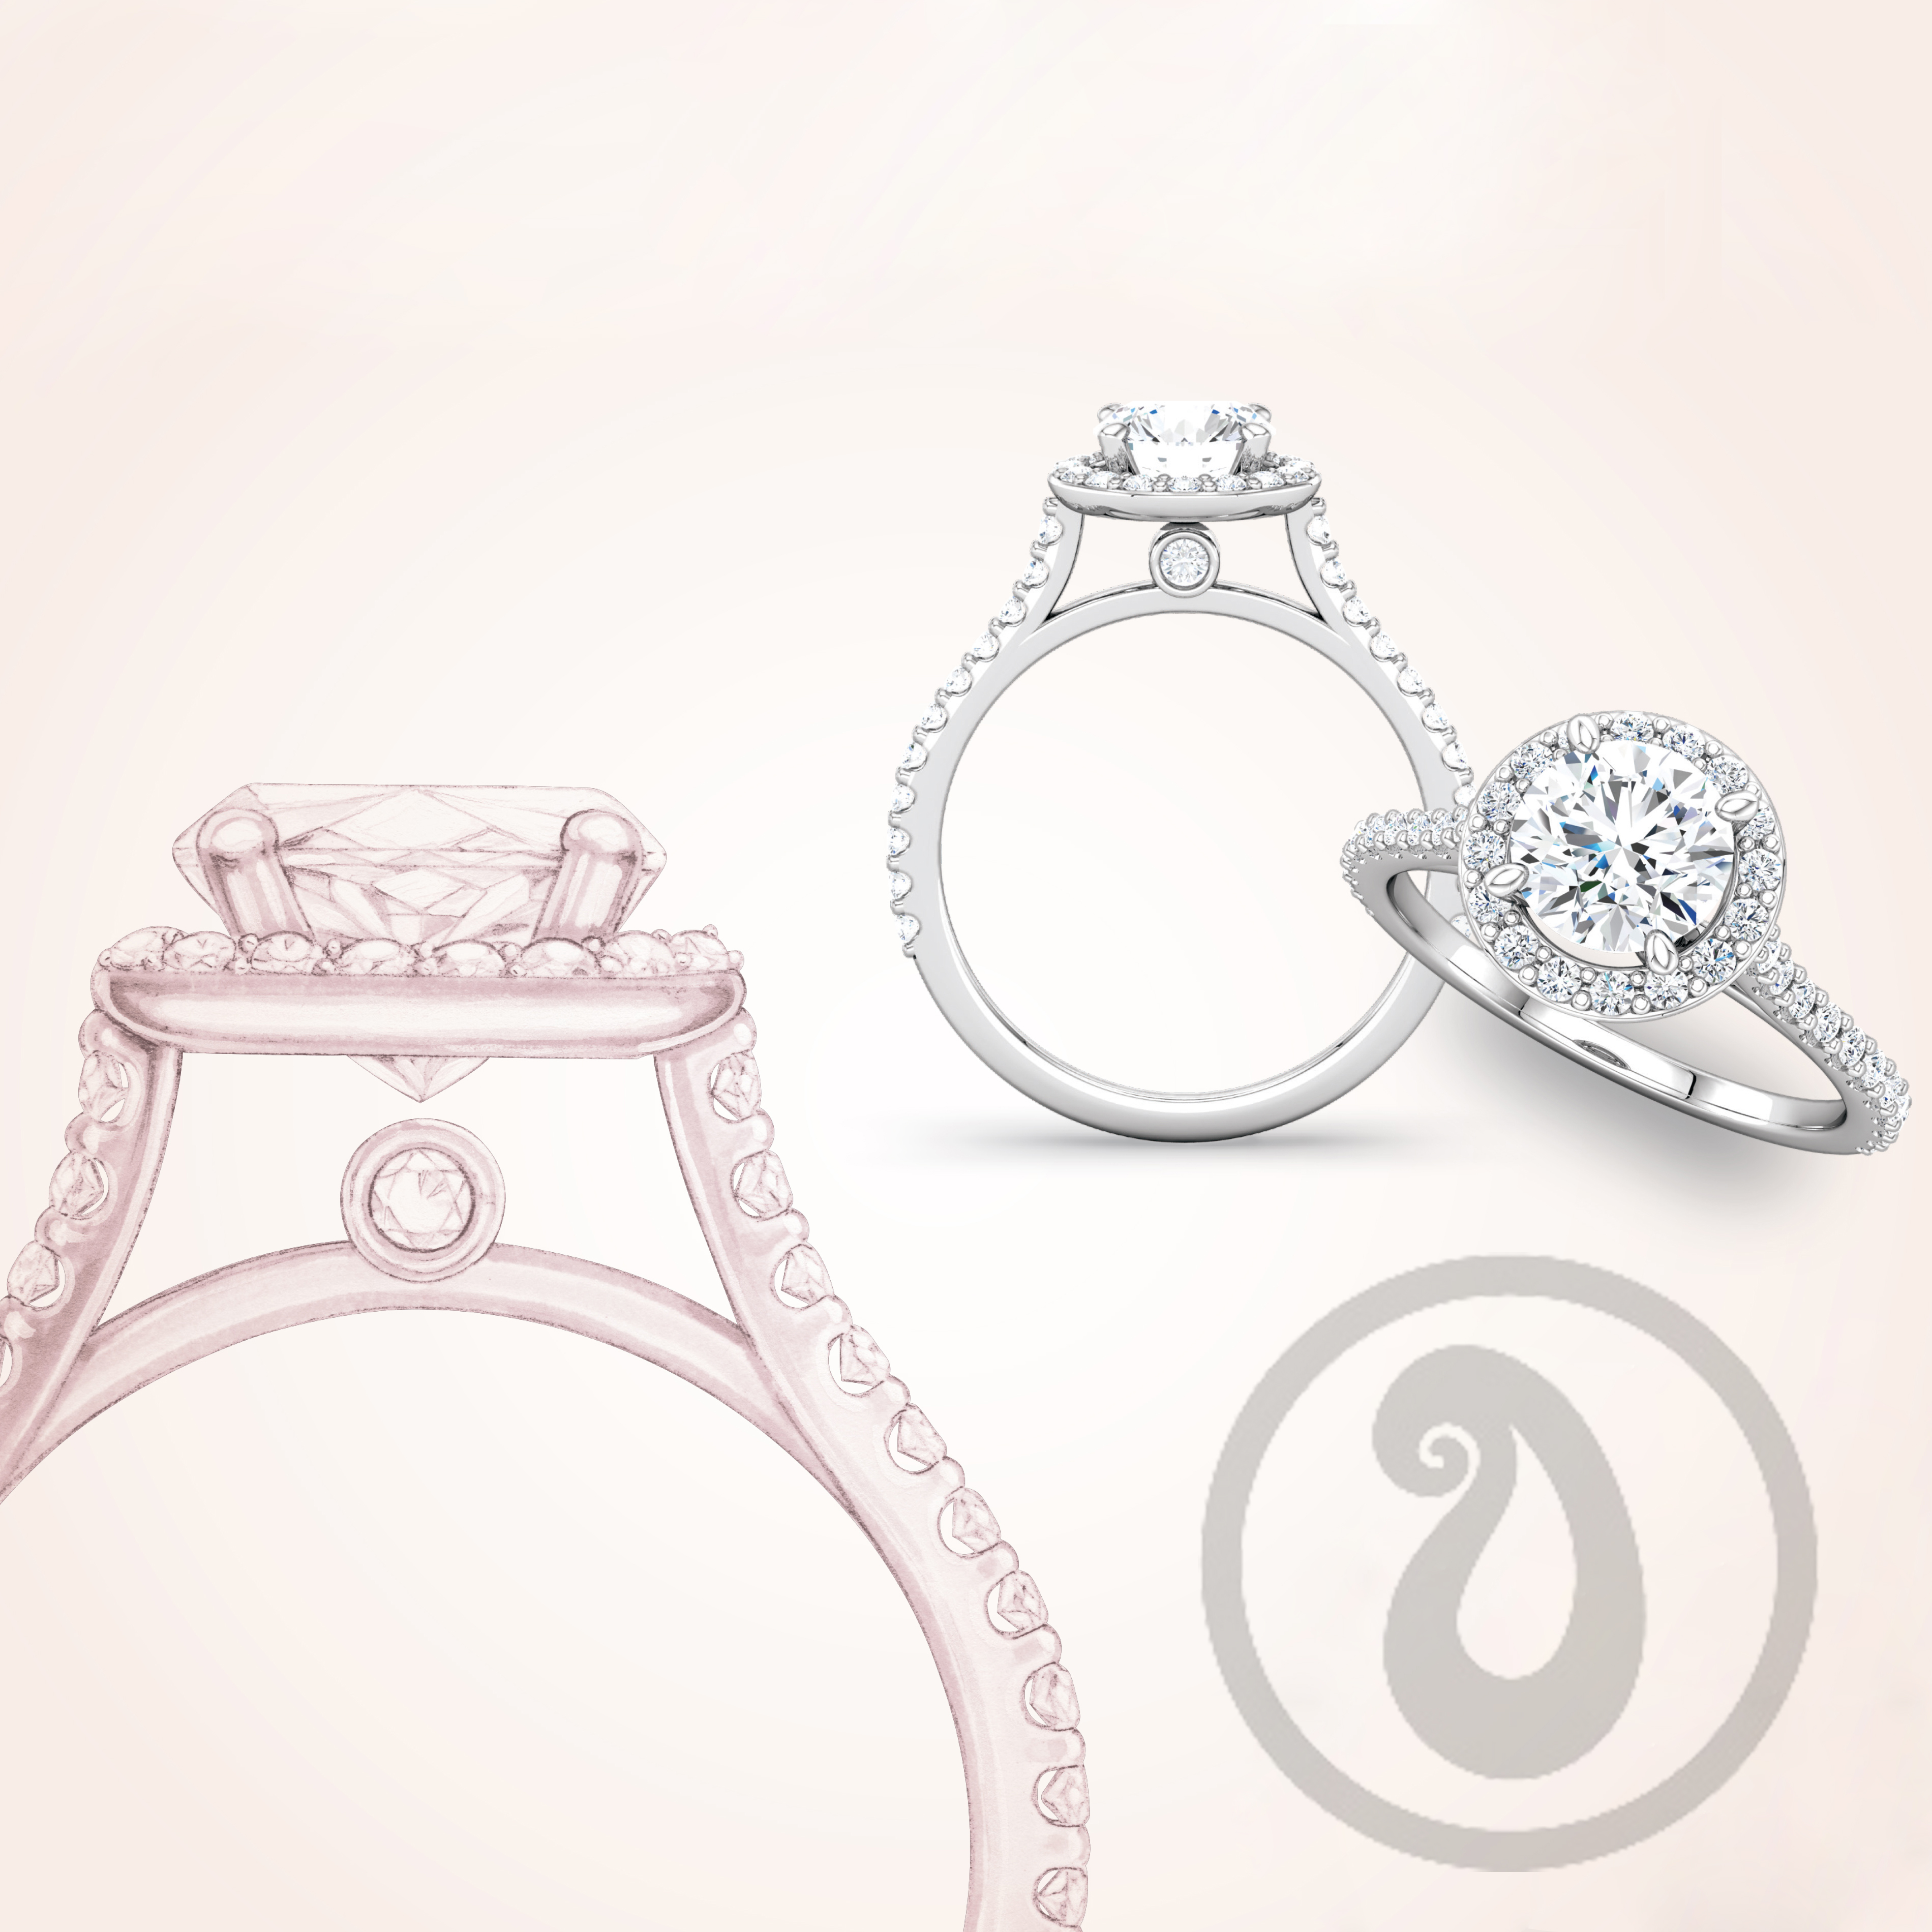 FAQs About Halo Rings - Wedding Bands & Co.